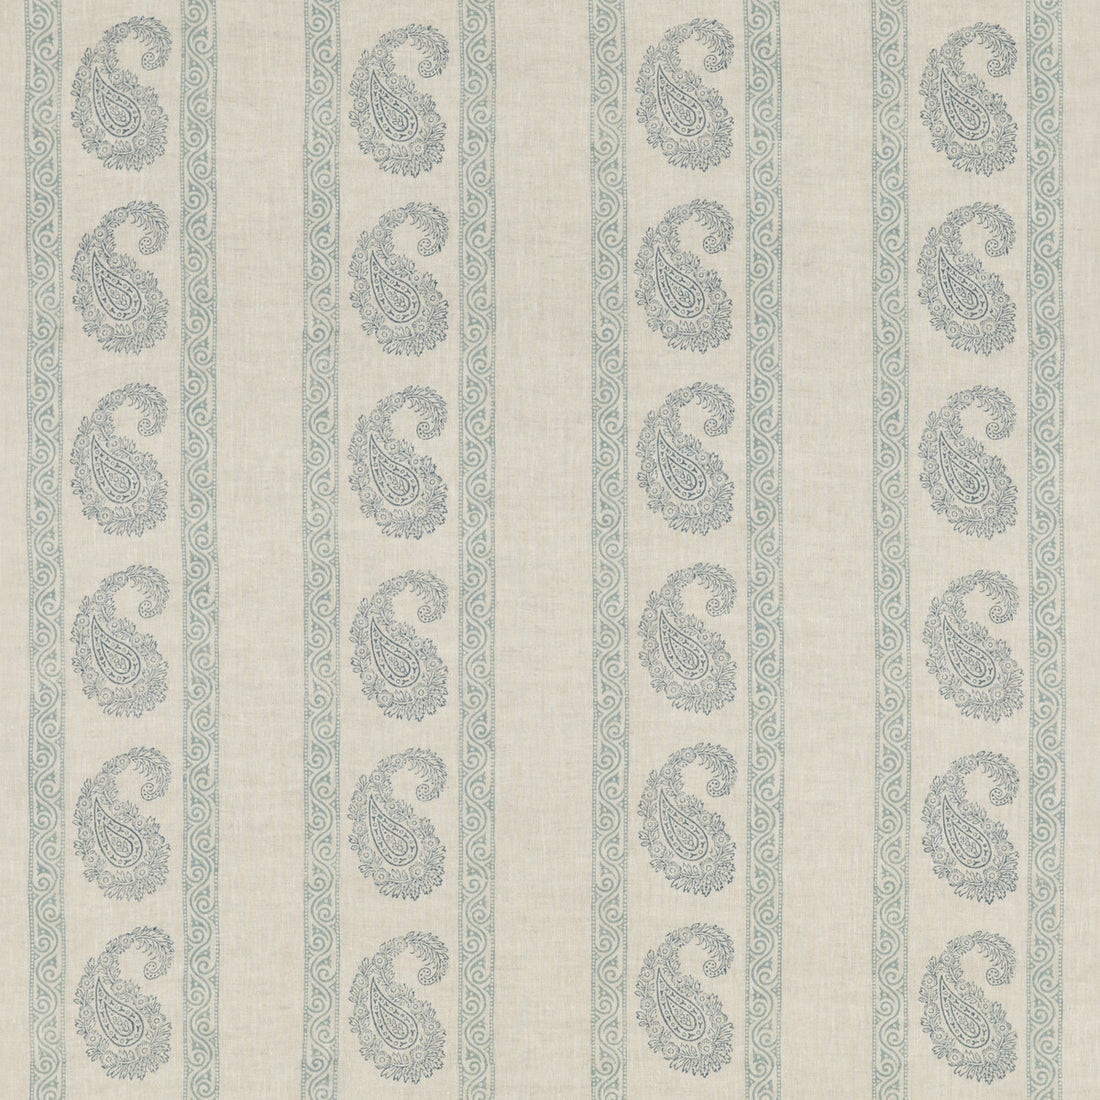 Vintage Paisley fabric in blue color - pattern BP10919.1.0 - by G P &amp; J Baker in the Portobello collection